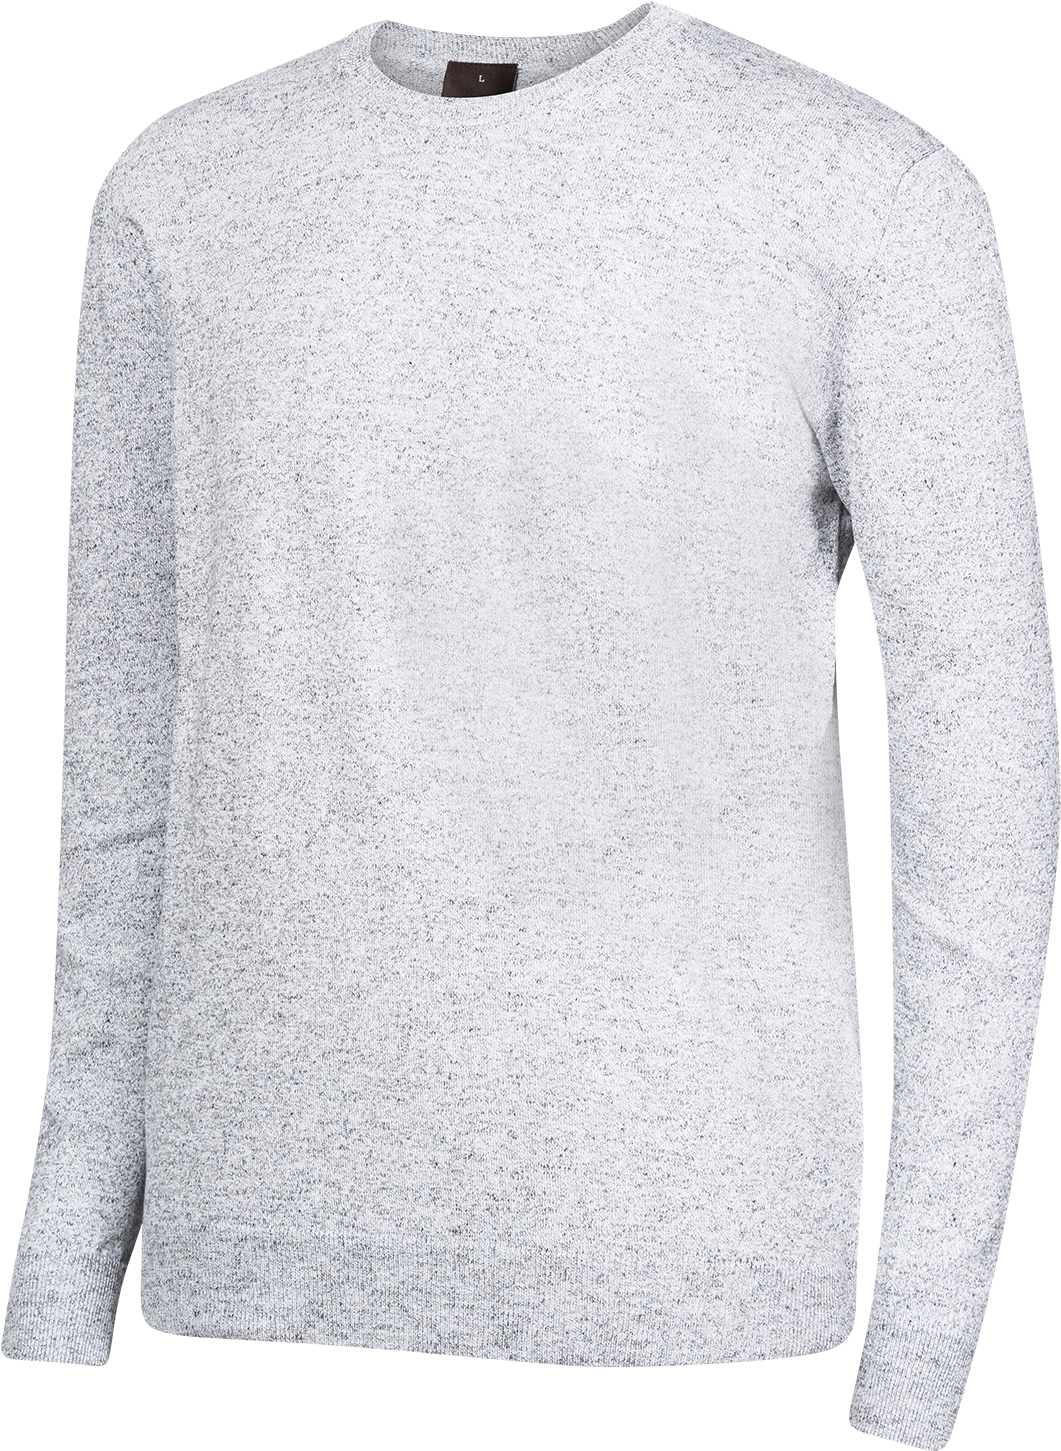 Sweater Png - Sweater (1500x1500), Png Download